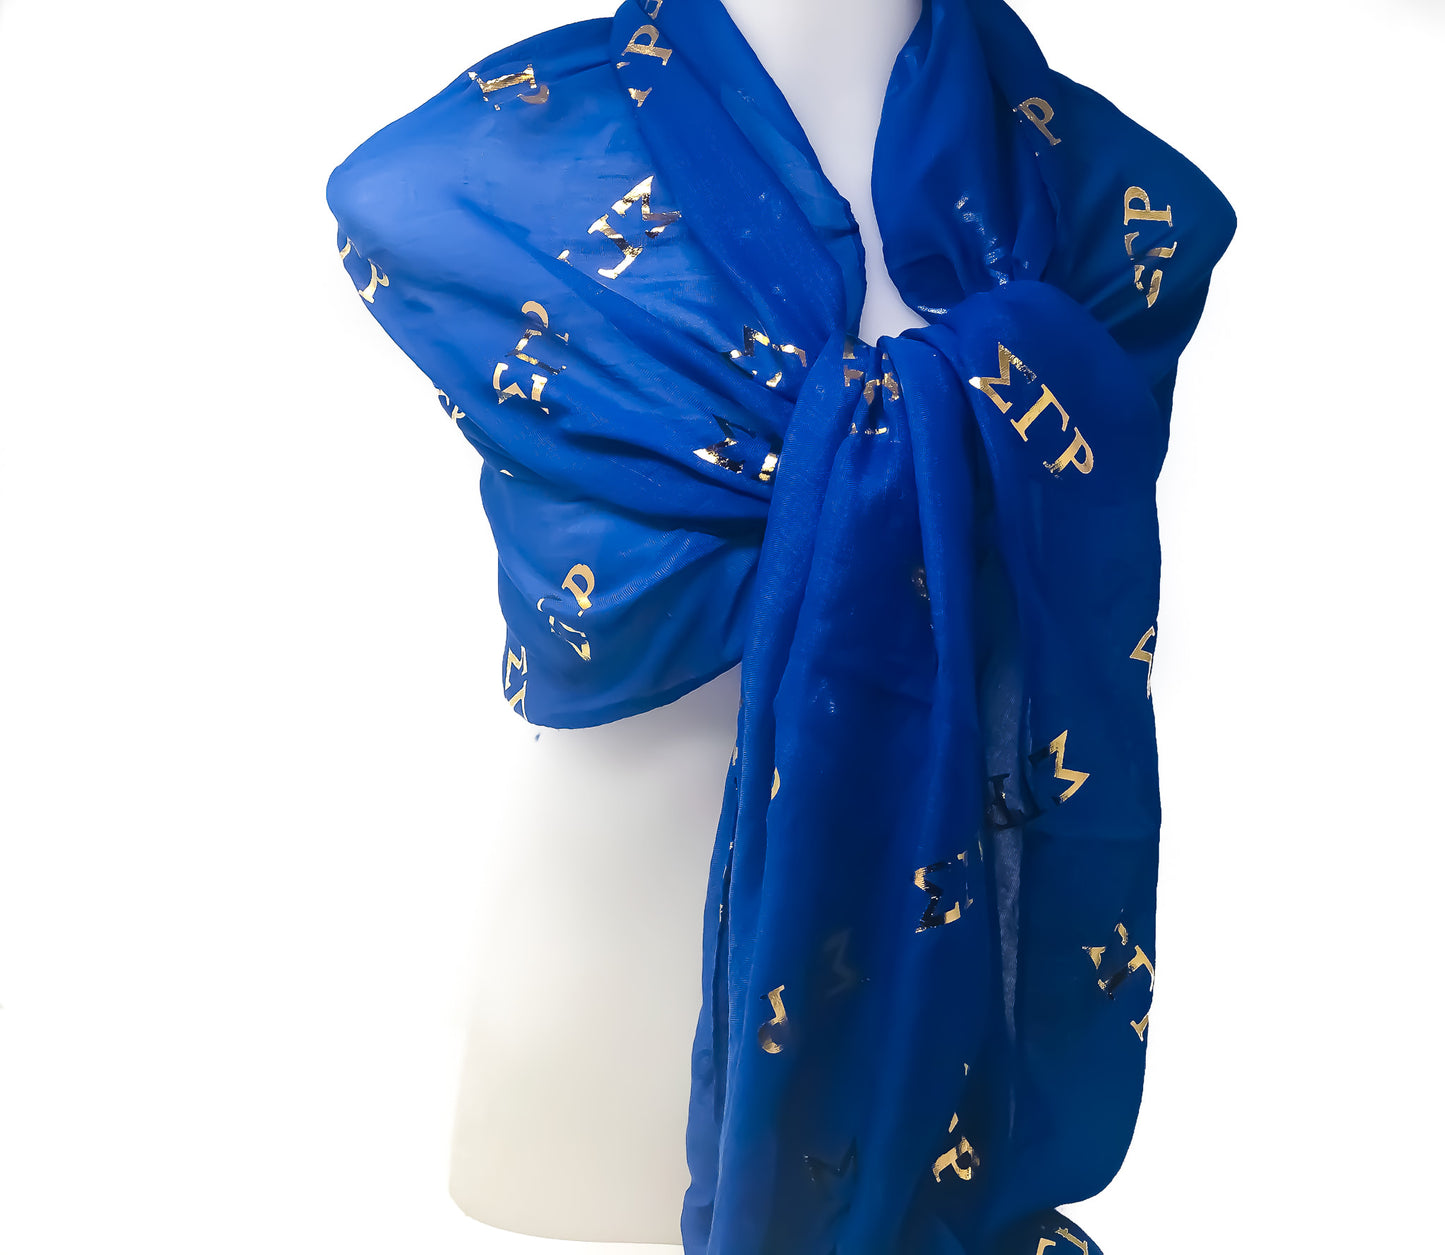 SGRho Scarf - Feather Light Scarf Wrap